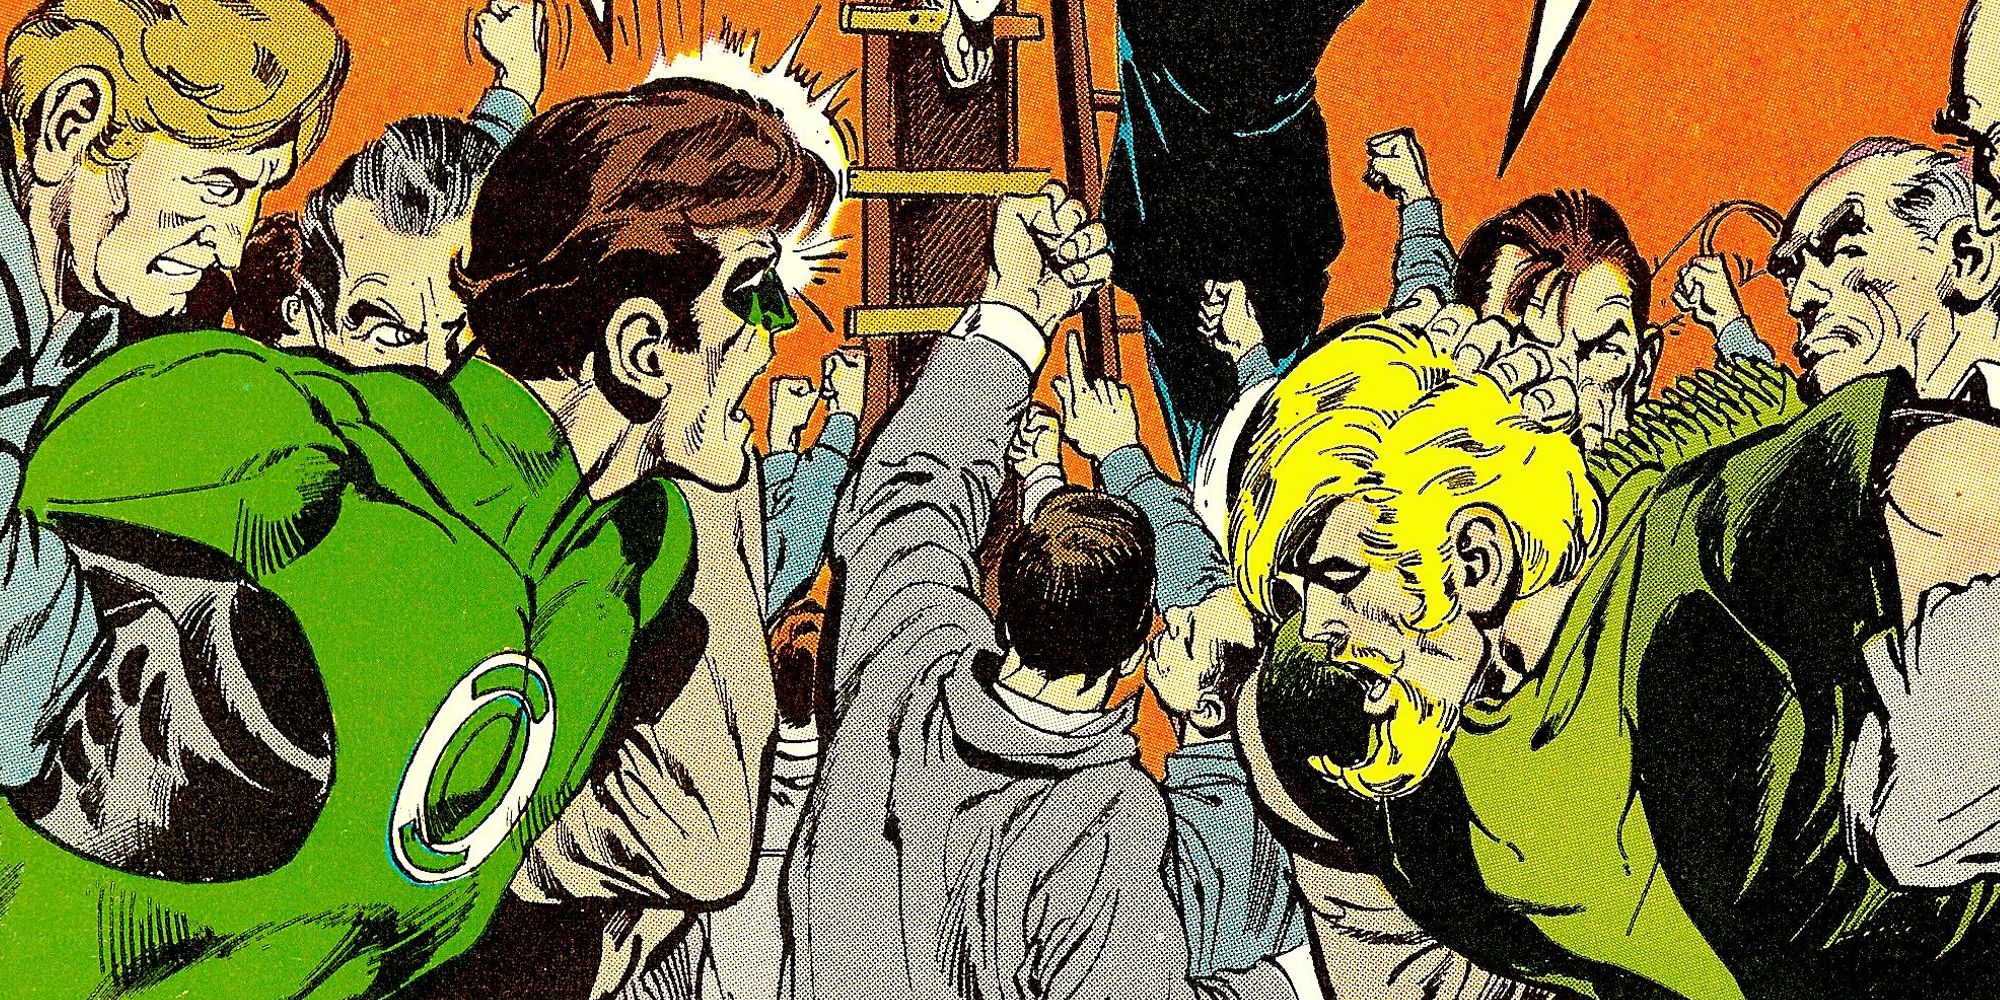 Green Lantern and Green Arrow are subdued by a mob on the cover of Green Lantern #89